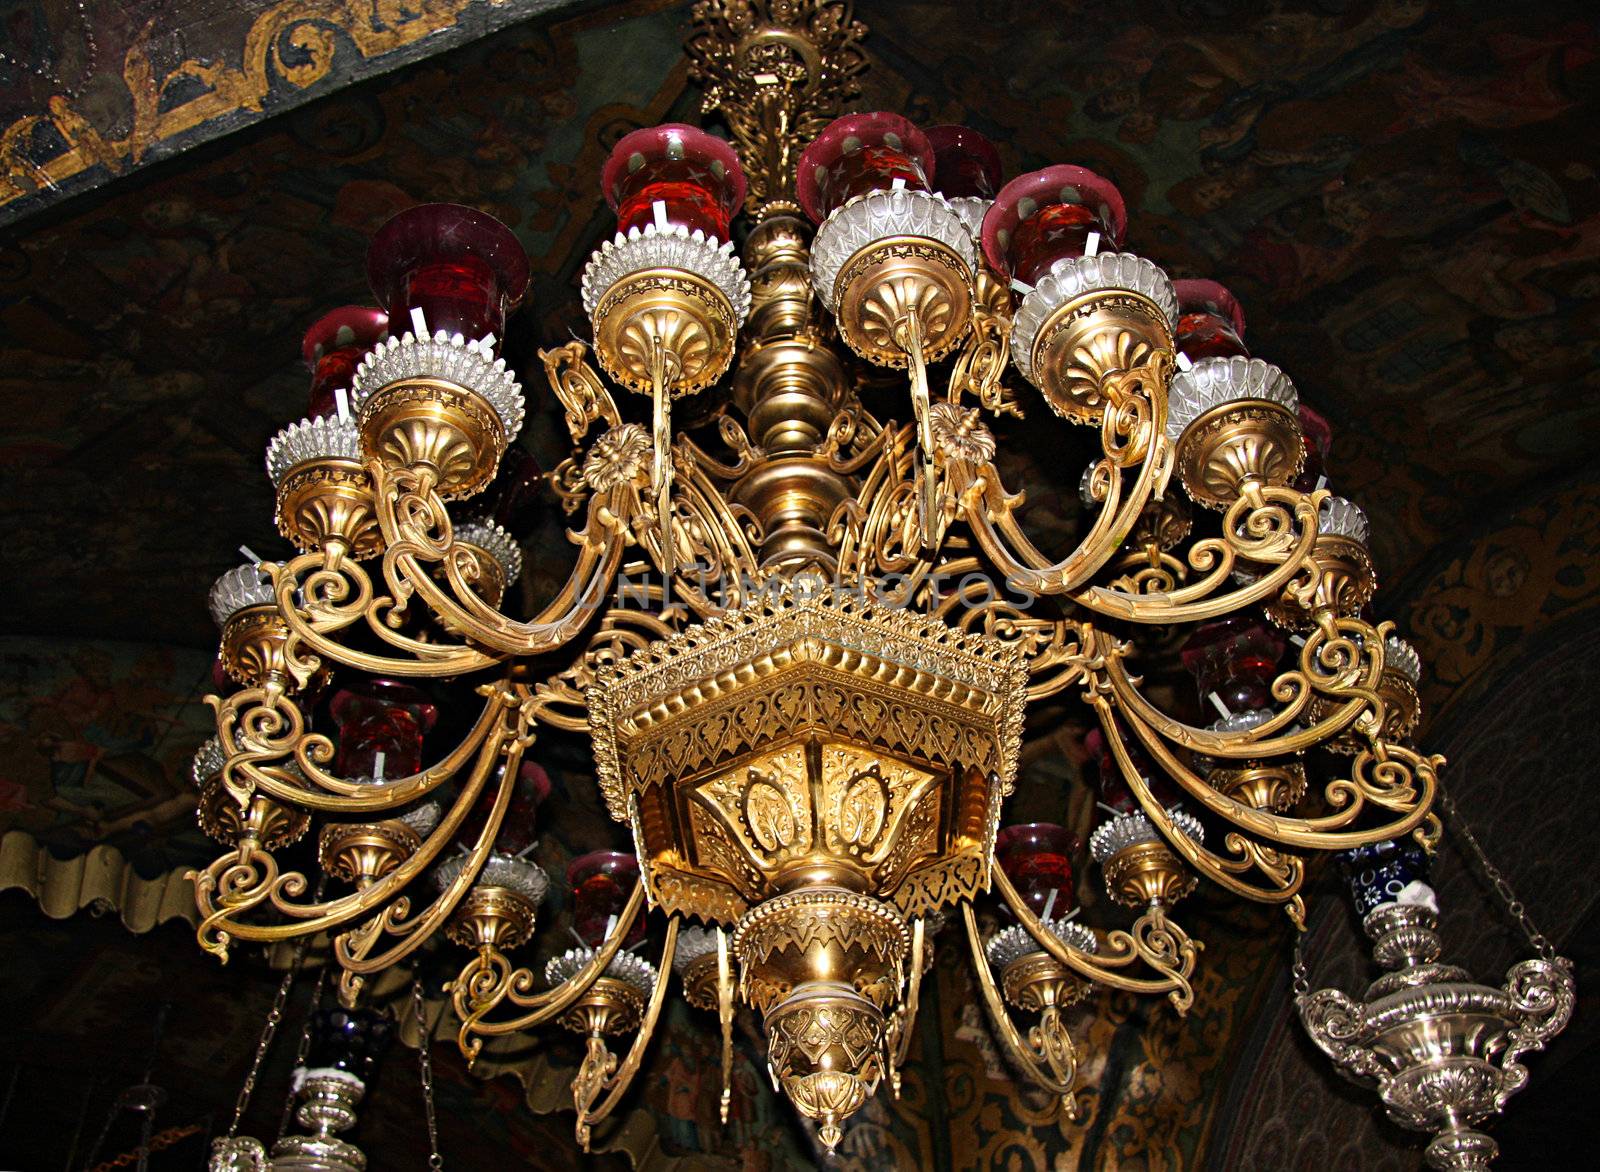 Chandelier in Church of the Holy Sepulchre by snowturtle